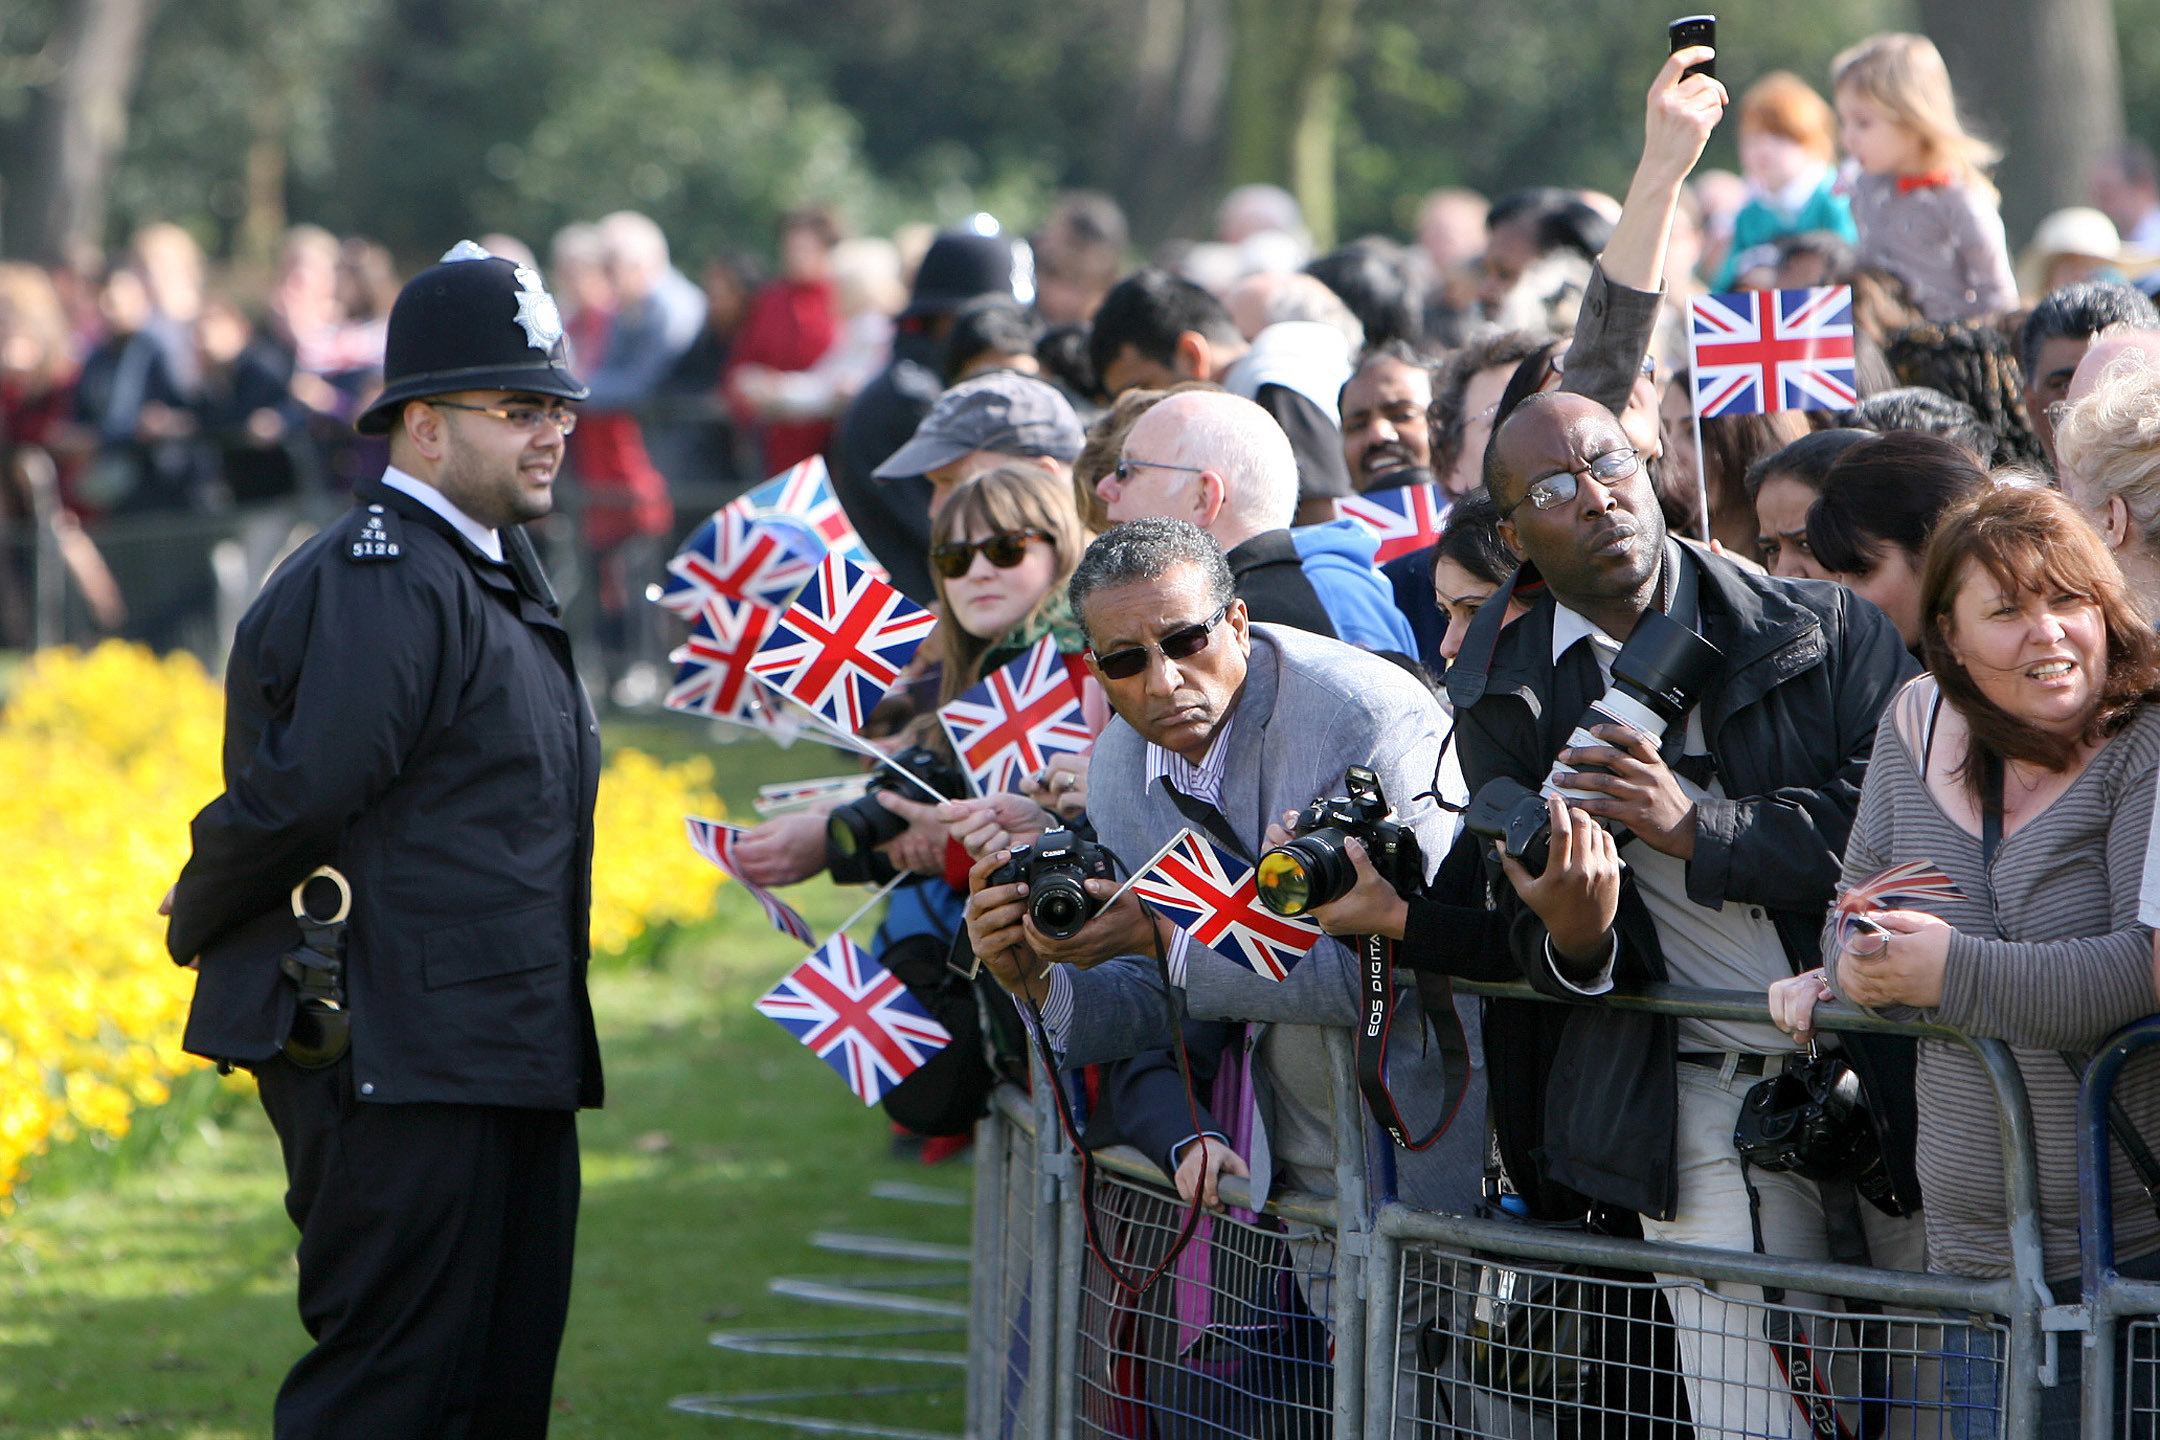 Large crowds attended the royal visit